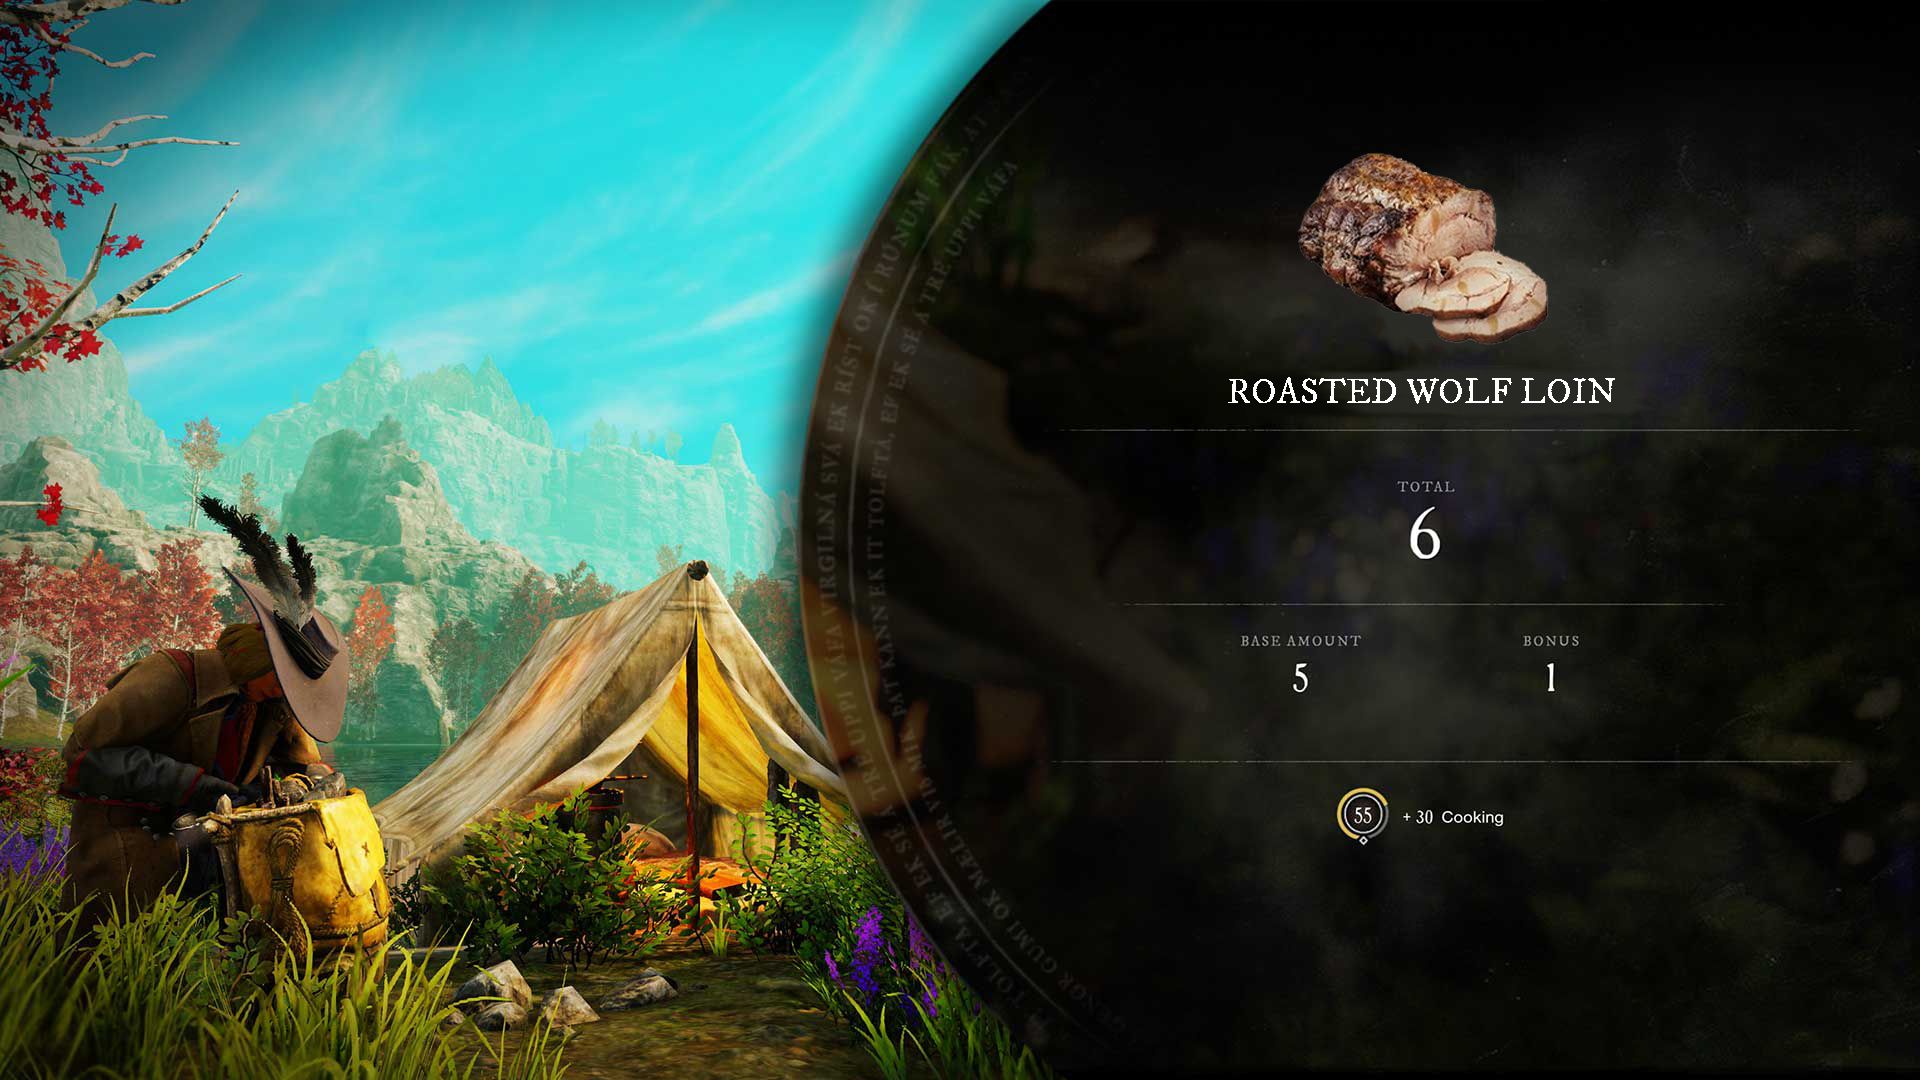 A player crafts a Roasted Wolf Loin recipe at a campsite